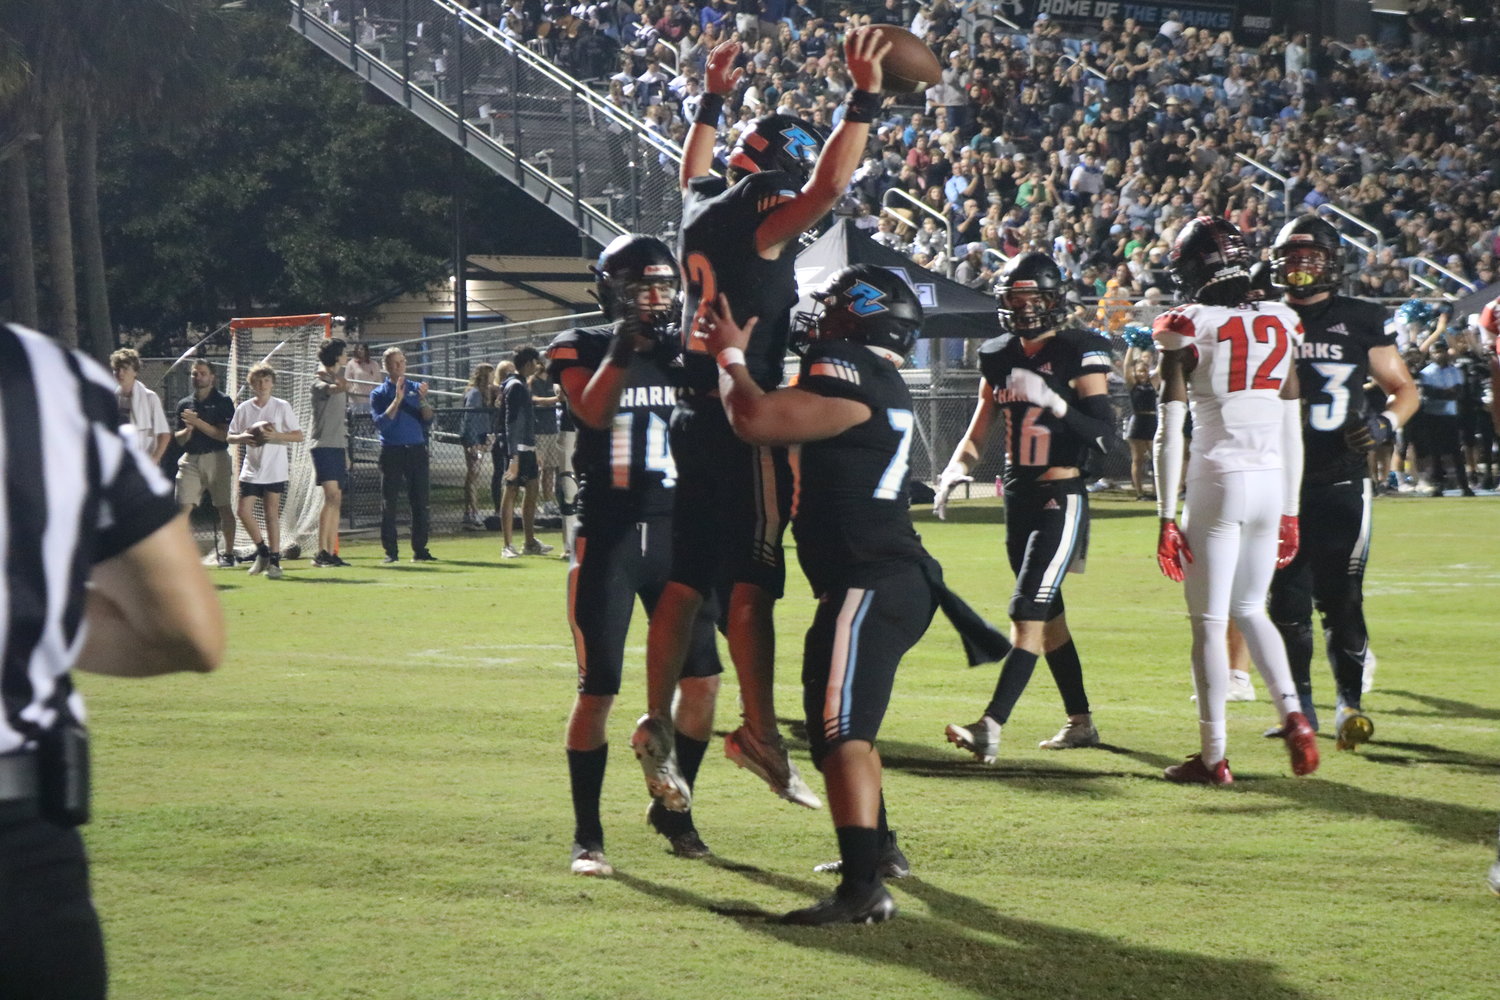 Ben Burk (No. 12) leaps into the air to celebrate a touchdown.